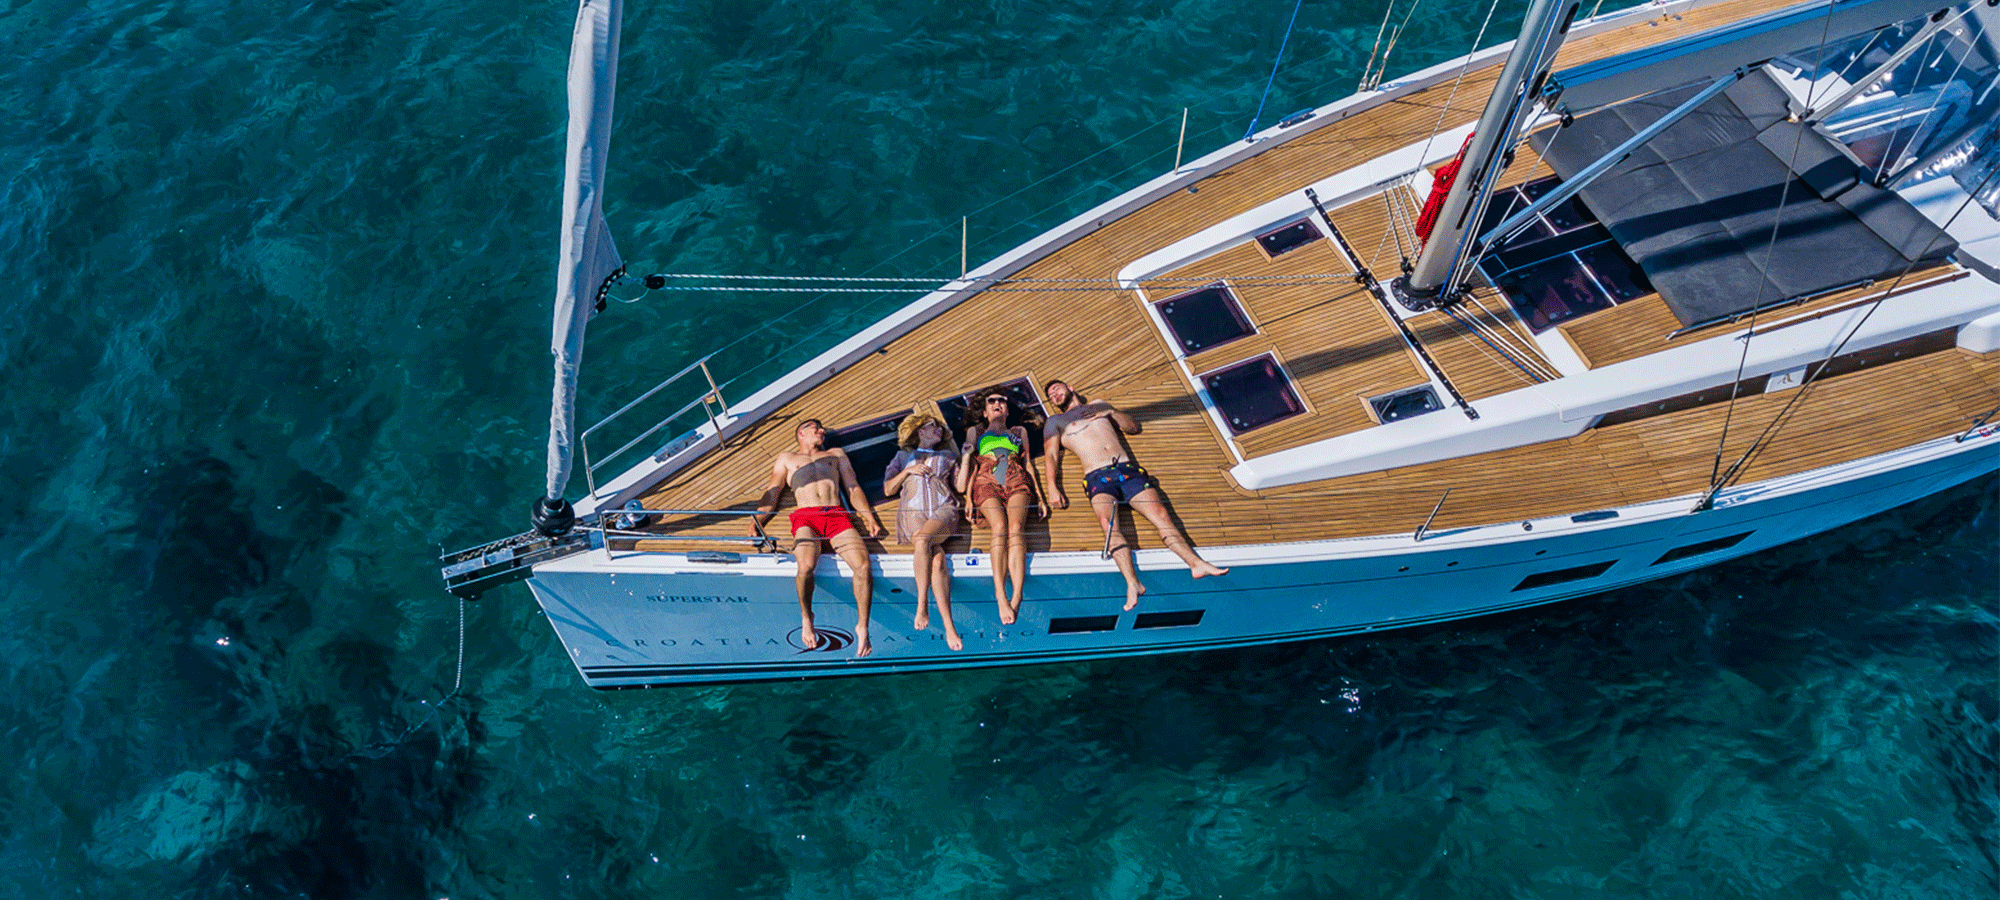 Explore the Croatian coast with Croatia Yachting Charter and share your sailing adventures!